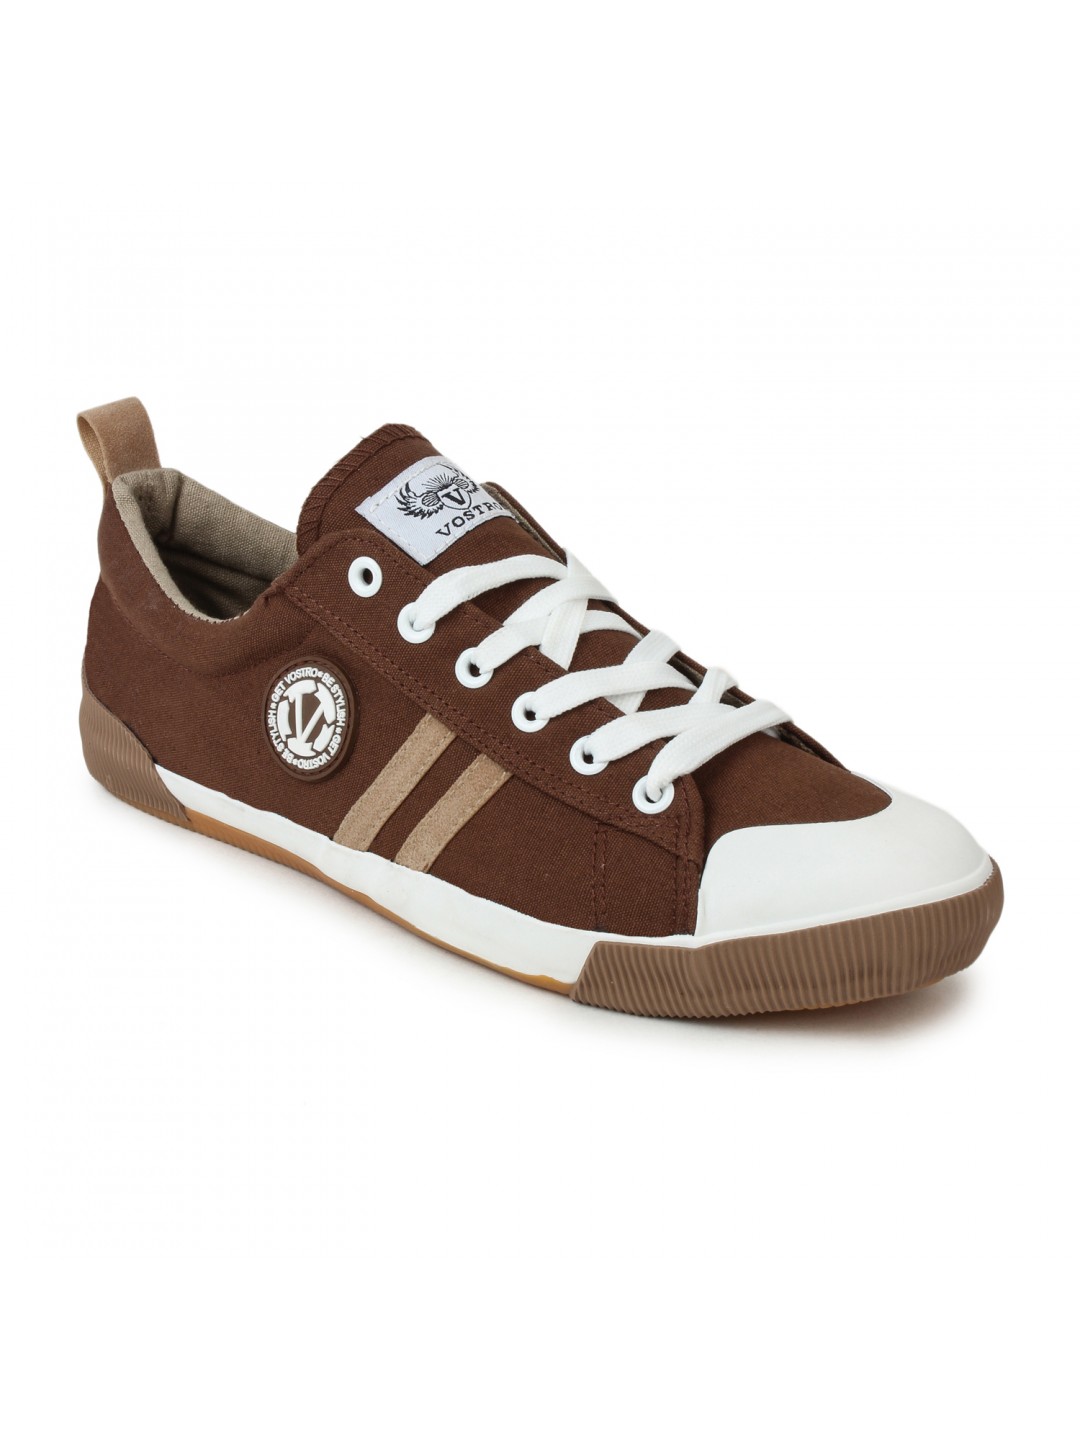 Vostro Brown Cream Casual Shoes for Men VCS0126